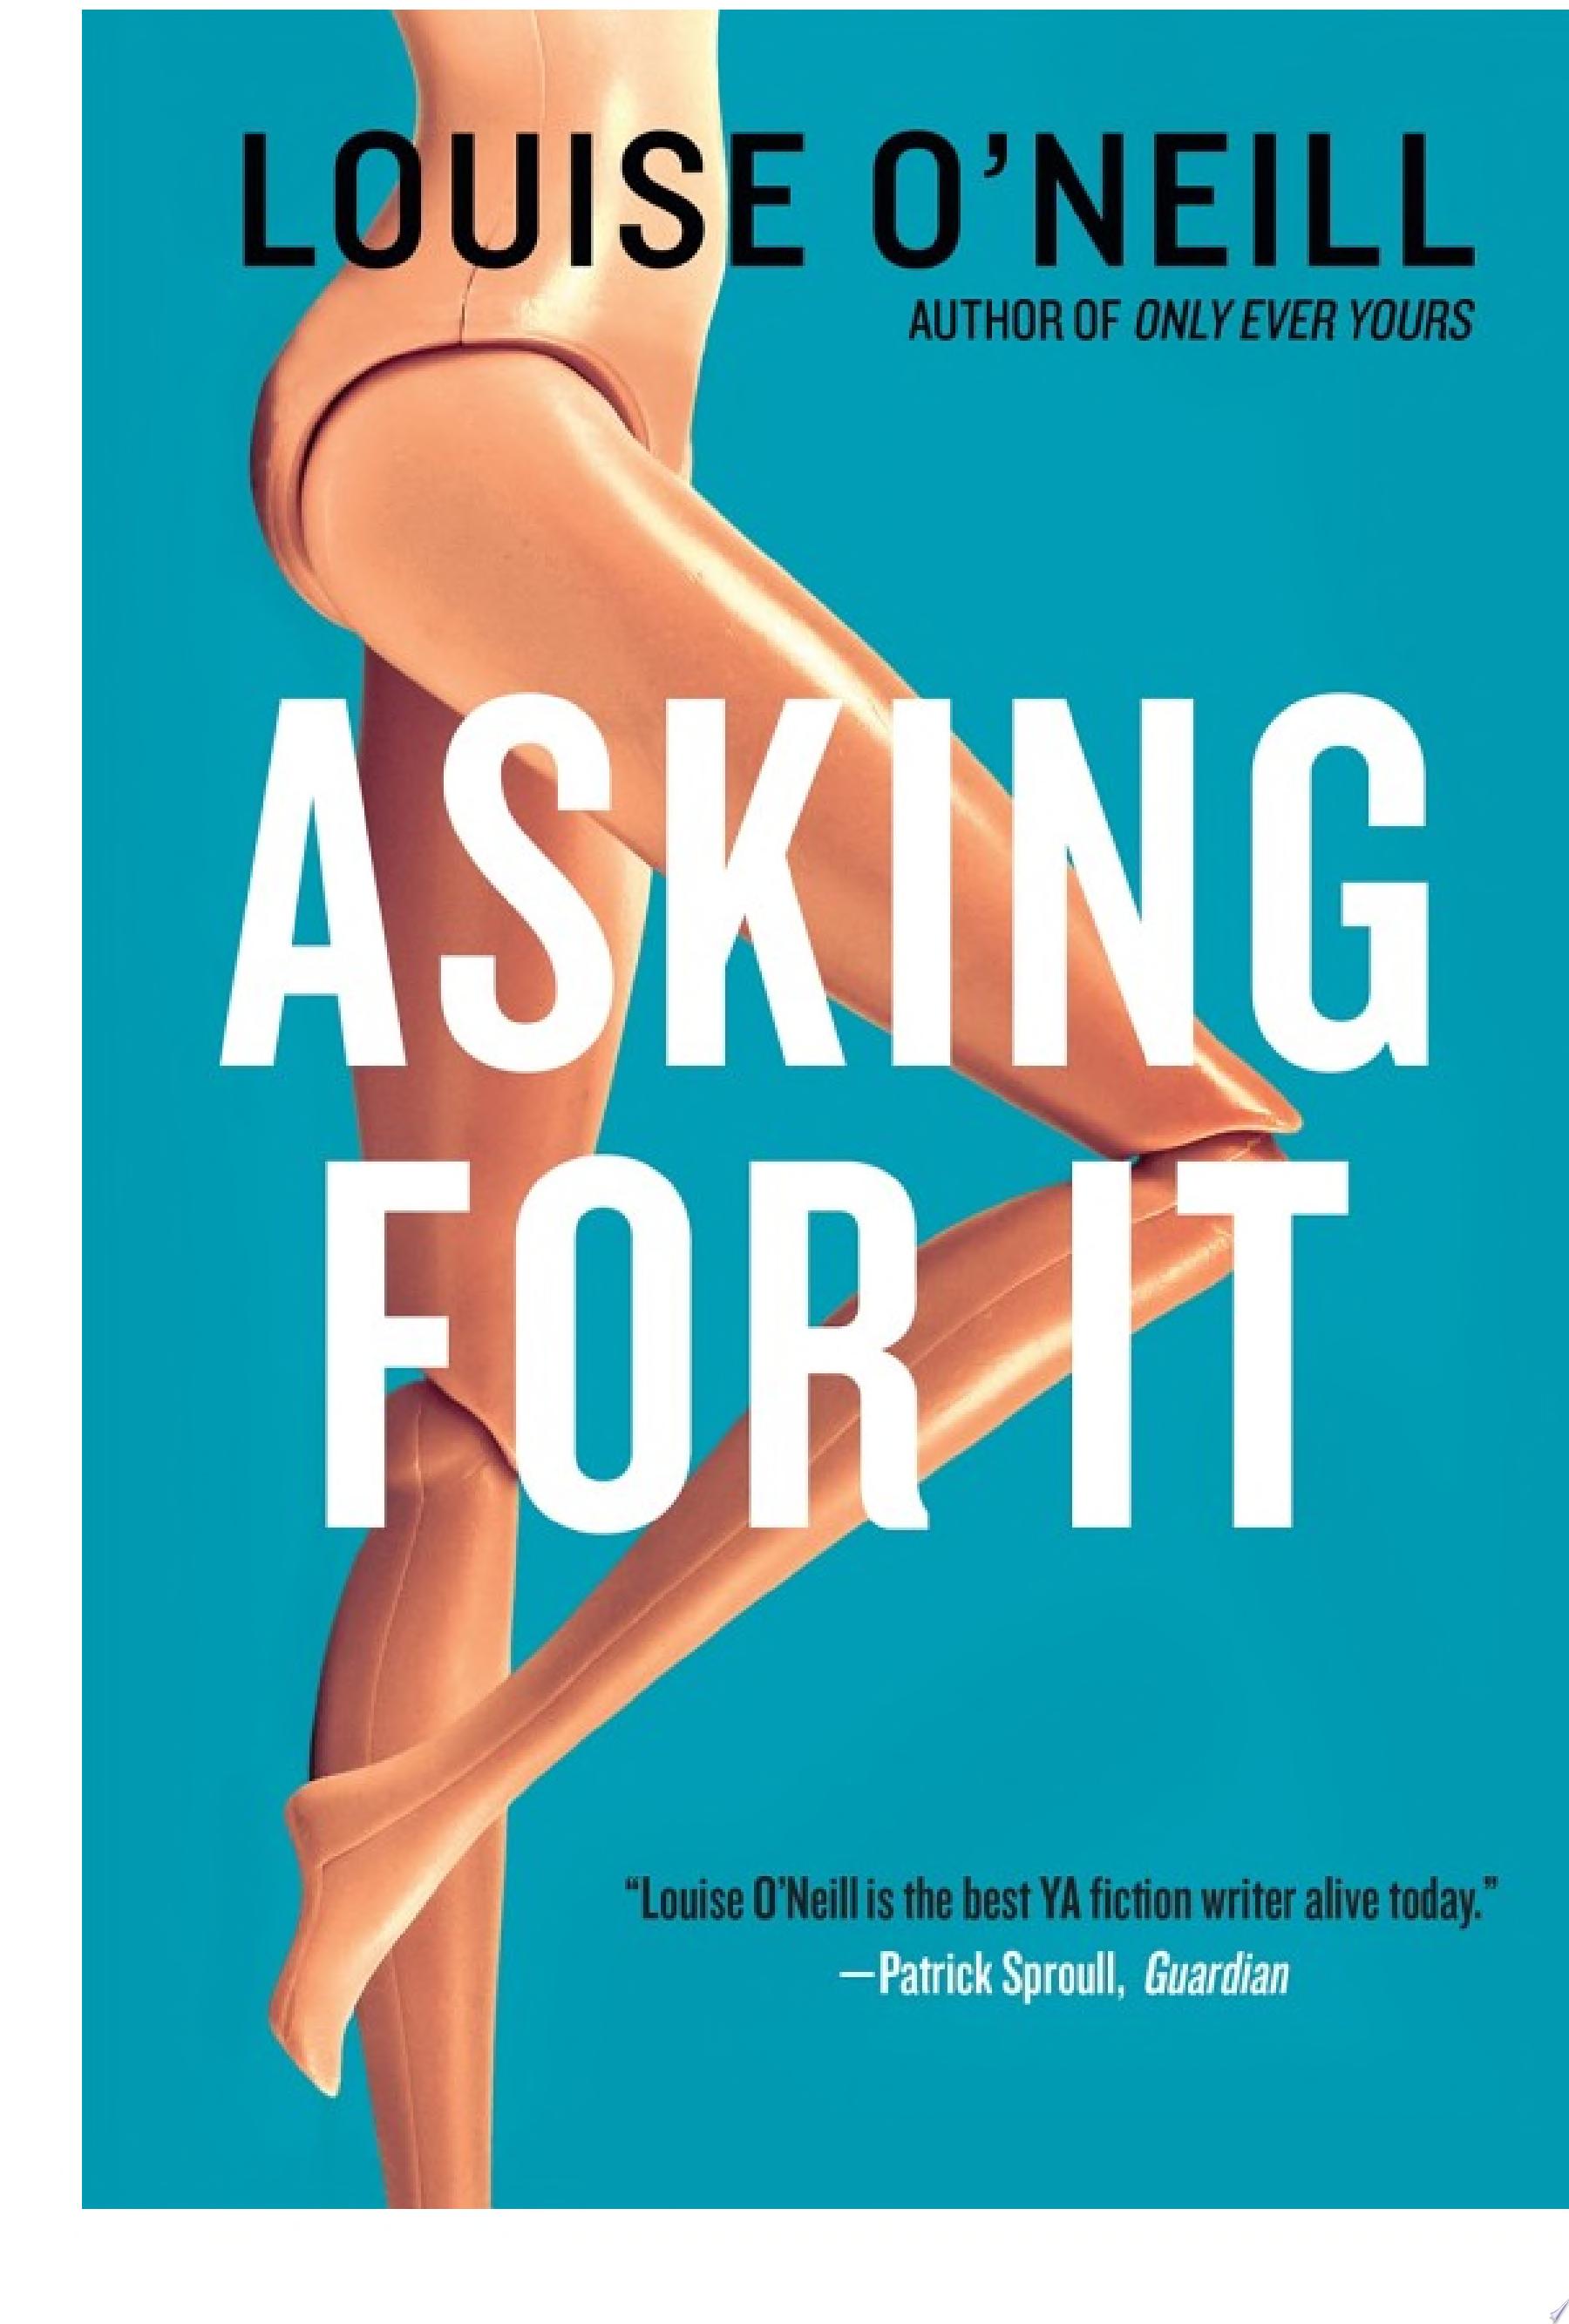 Image for "Asking For It"